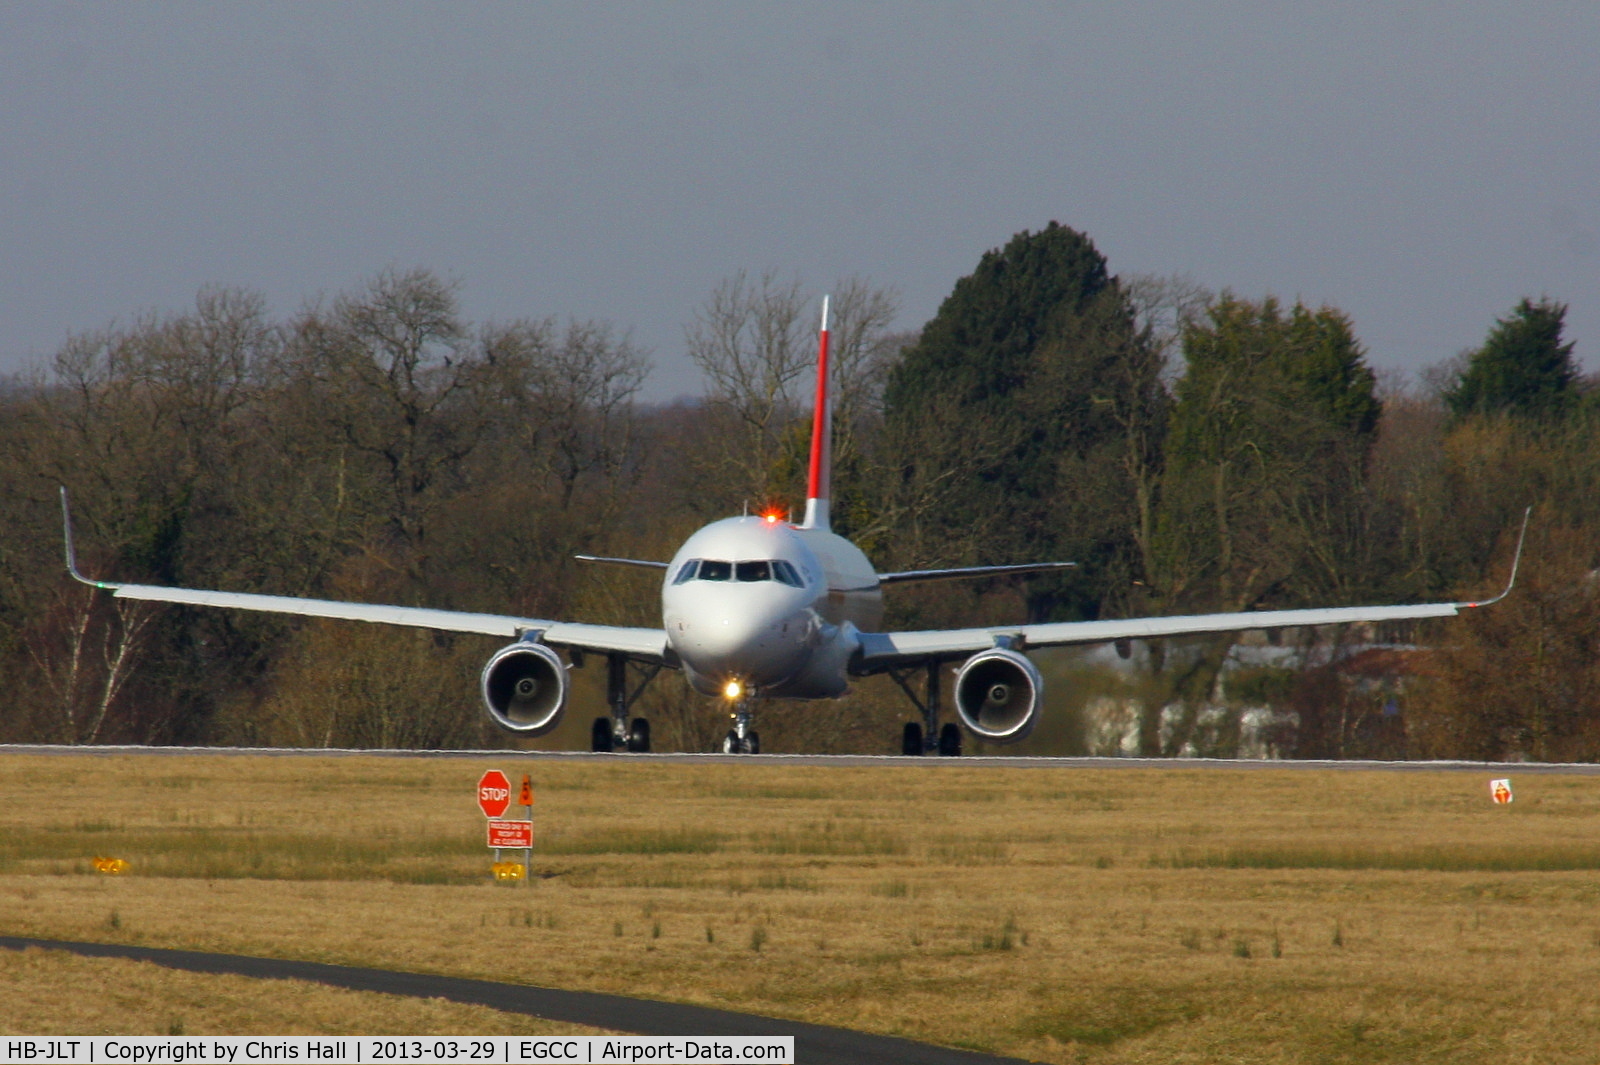 HB-JLT, 2013 Airbus A320-214 C/N 5518, Brand new A320 fitted with 